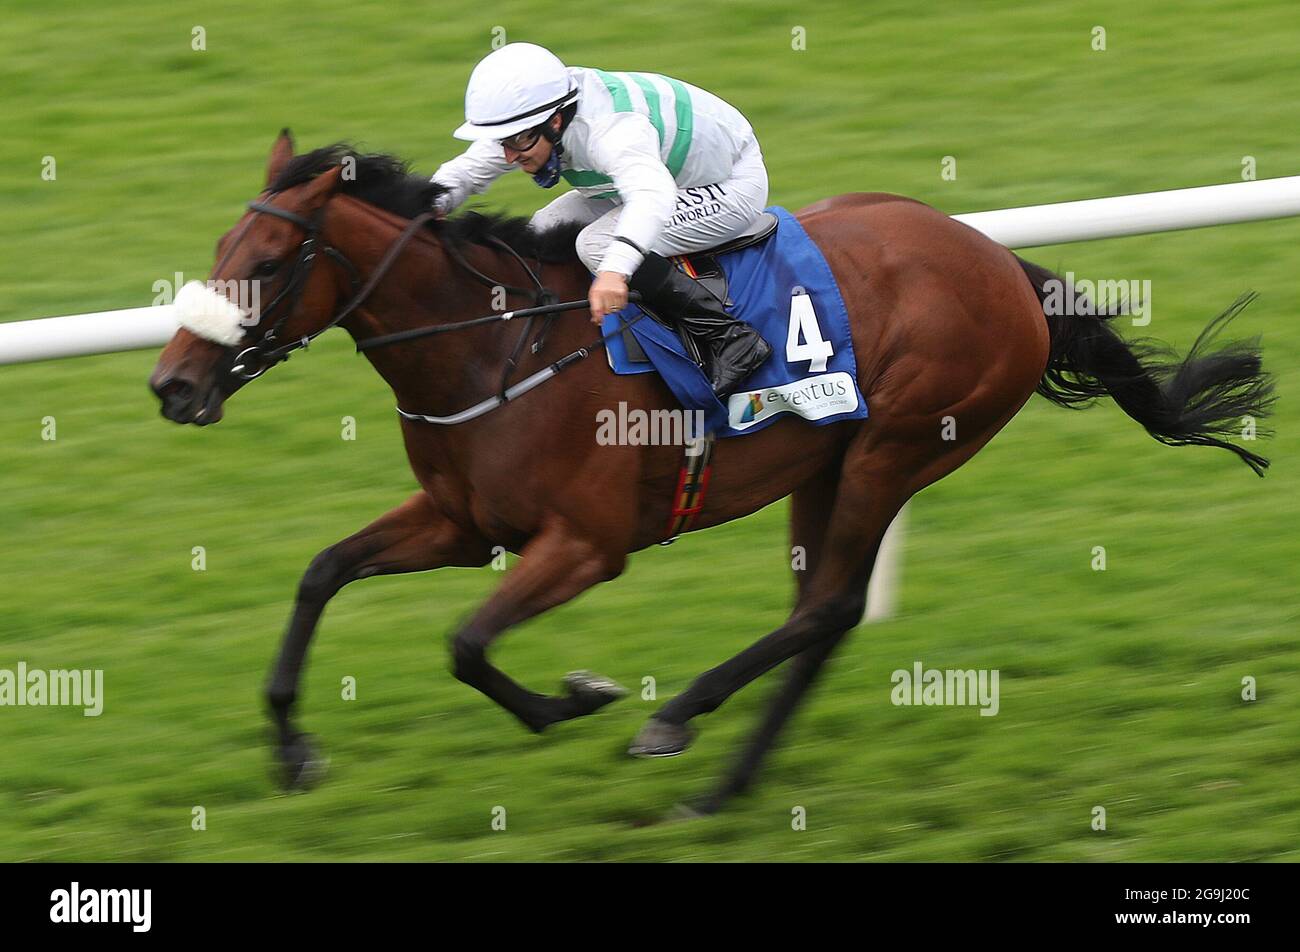 Citronnade and Shane Foley coming home to win the Eventus Handicap during the opening day of the Galway Races Summer Festival 2021 at Galway Racecourse. Picture date: Monday July 26, 2021. See PA story RACING Galway. Photo credit should read: Niall Carson/PA Wire. RESTRICTIONS: Use subject to restrictions. Editorial use only, no commercial use without prior consent from rights holder. Stock Photo